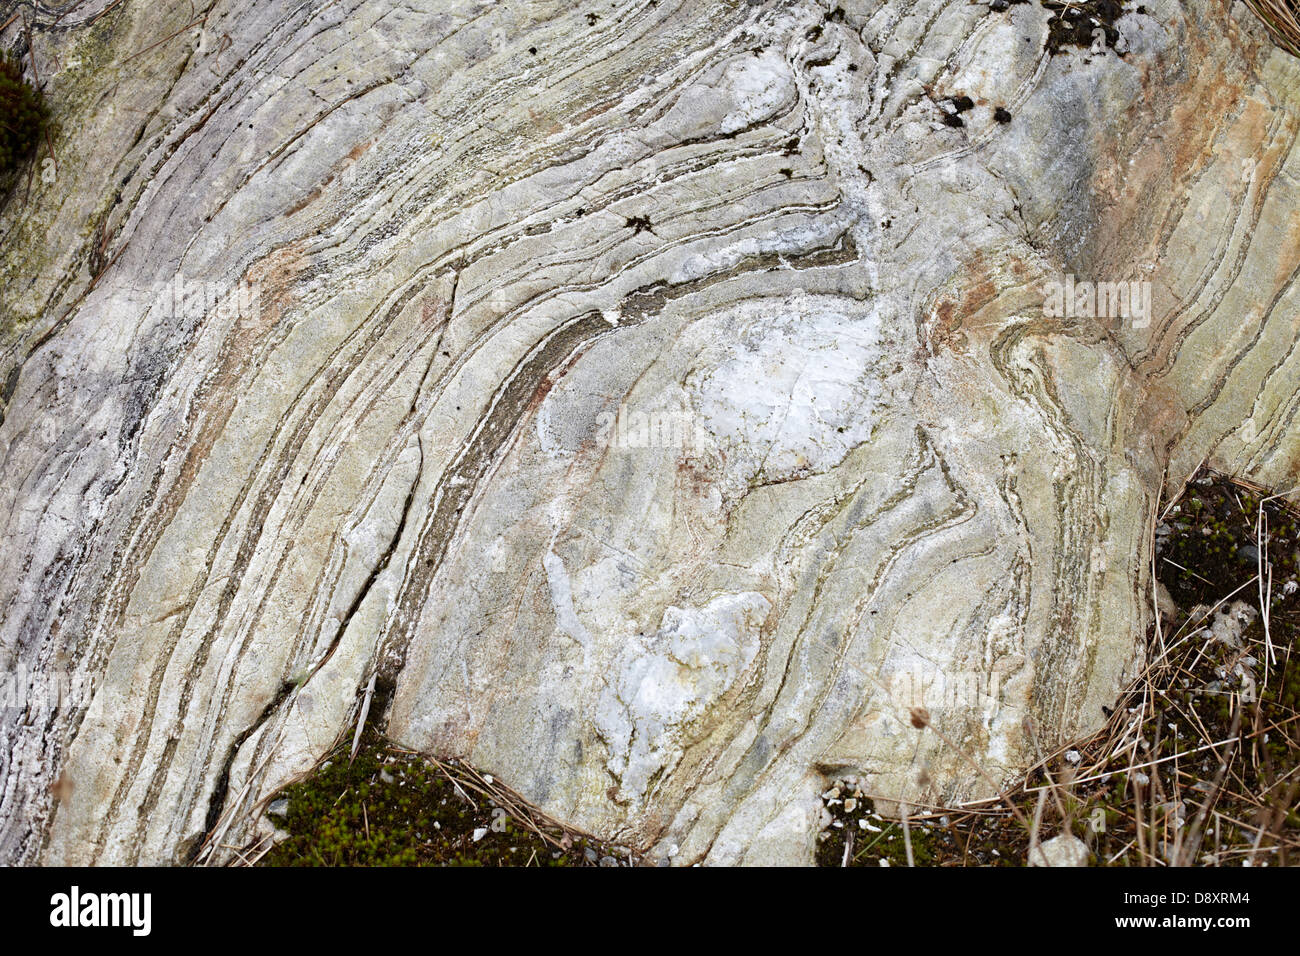 Forestry at Polloch and Loch Shiel. Rock layer formations Stock Photo